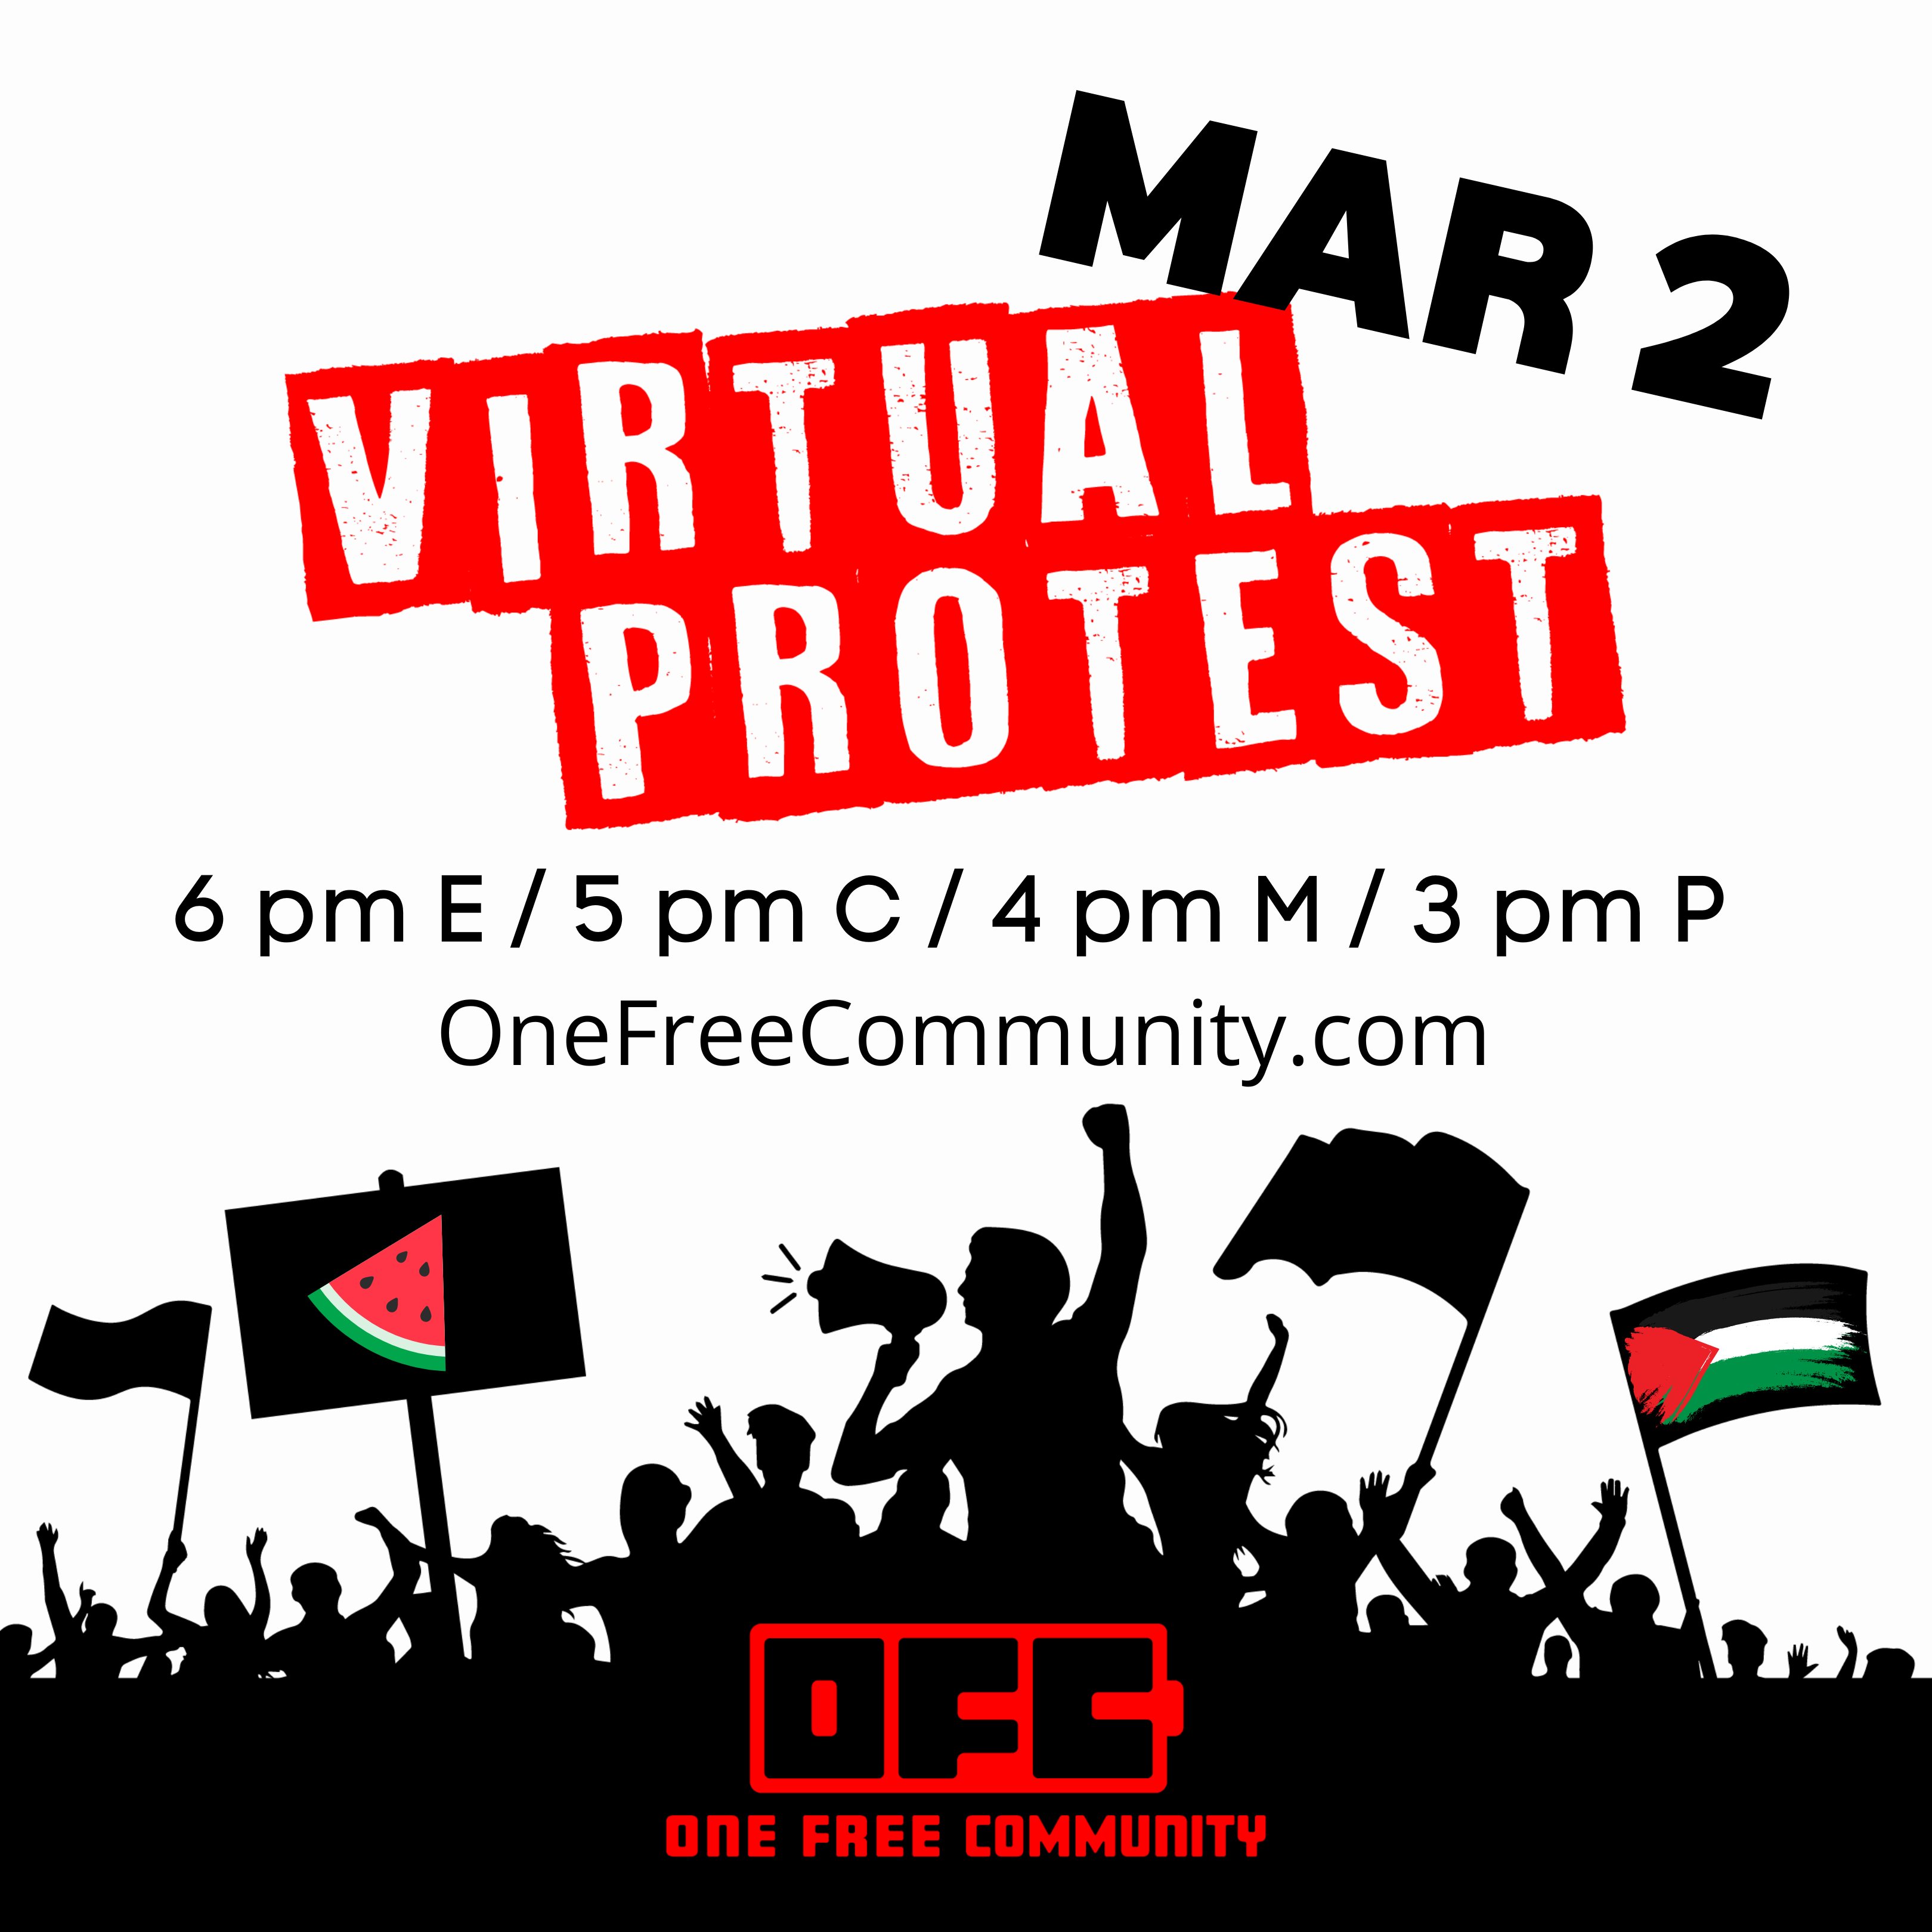 Virtual Protest flier with Mar 2 date and time.